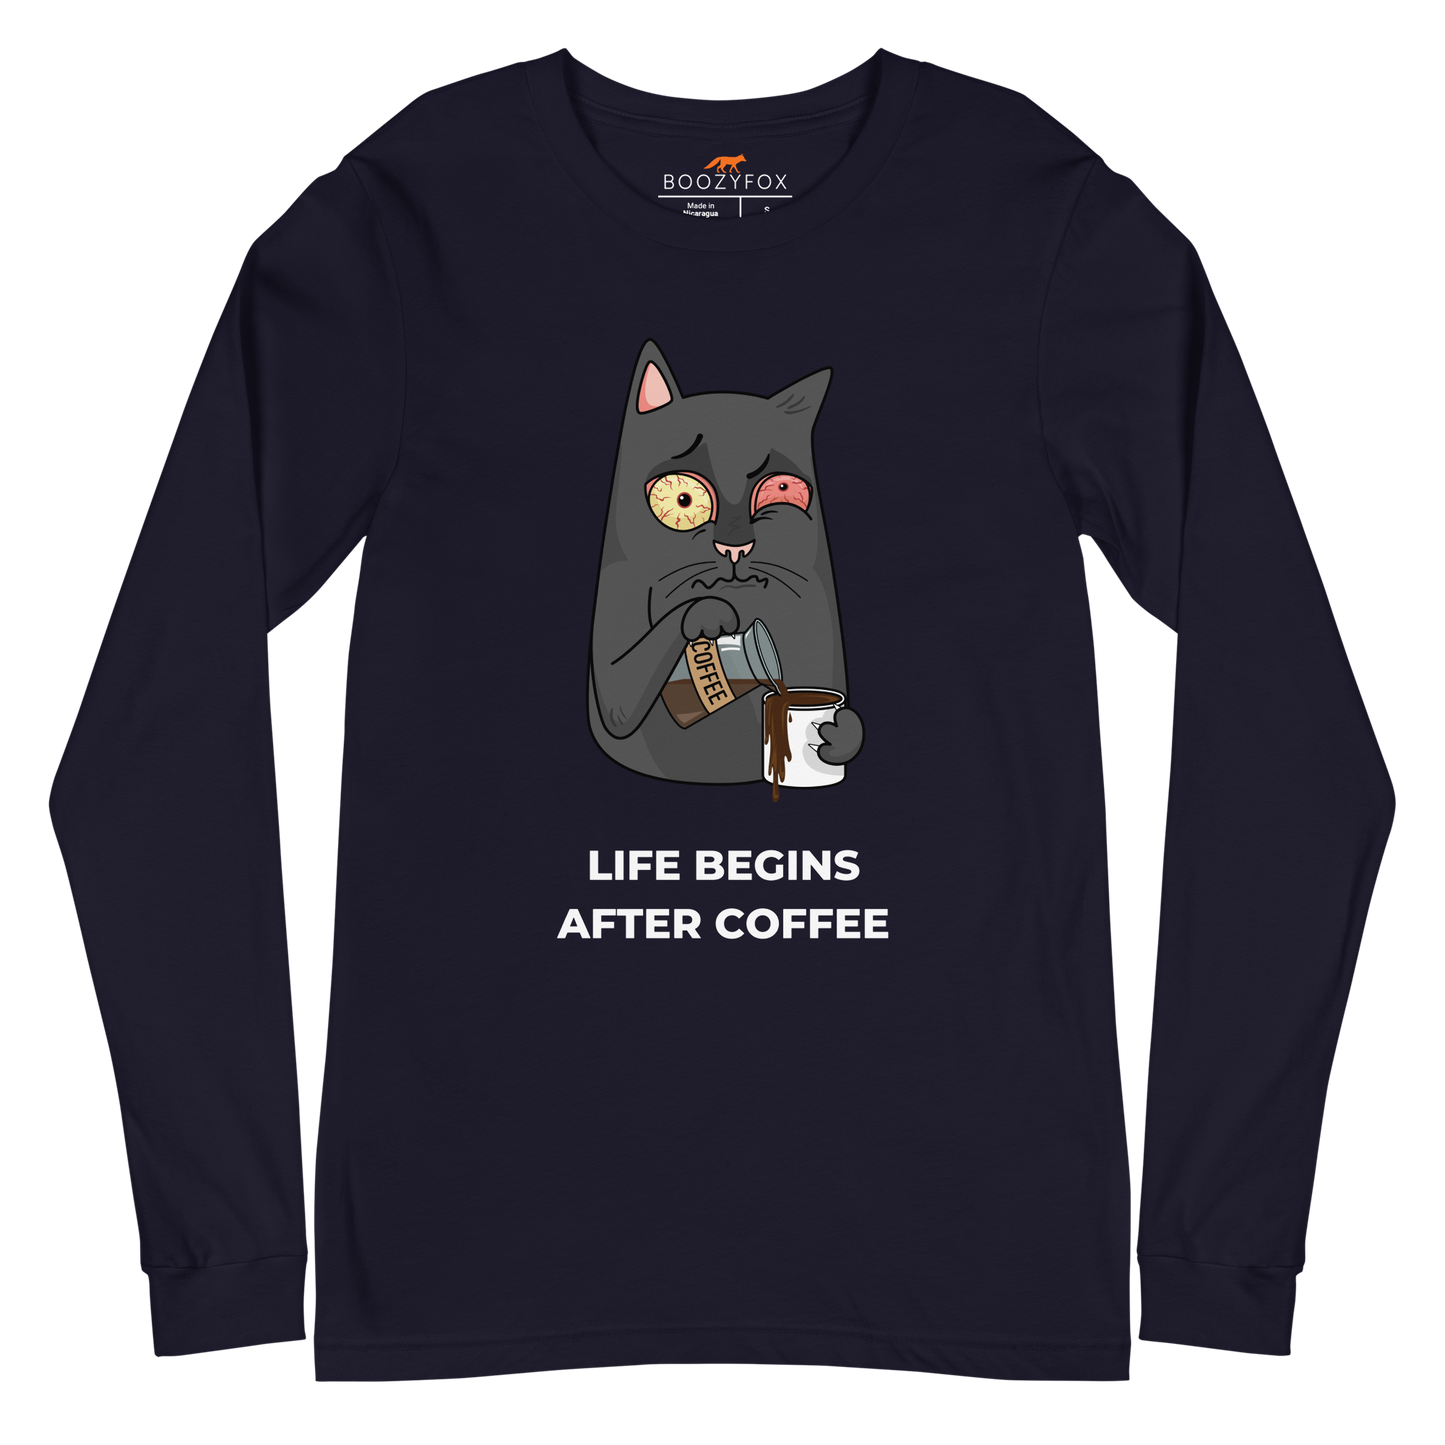 Navy Cat Long Sleeve Tee featuring a hilarious Life Begins After Coffee graphic on the chest - Funny Cat Long Sleeve Graphic Tees - Boozy Fox